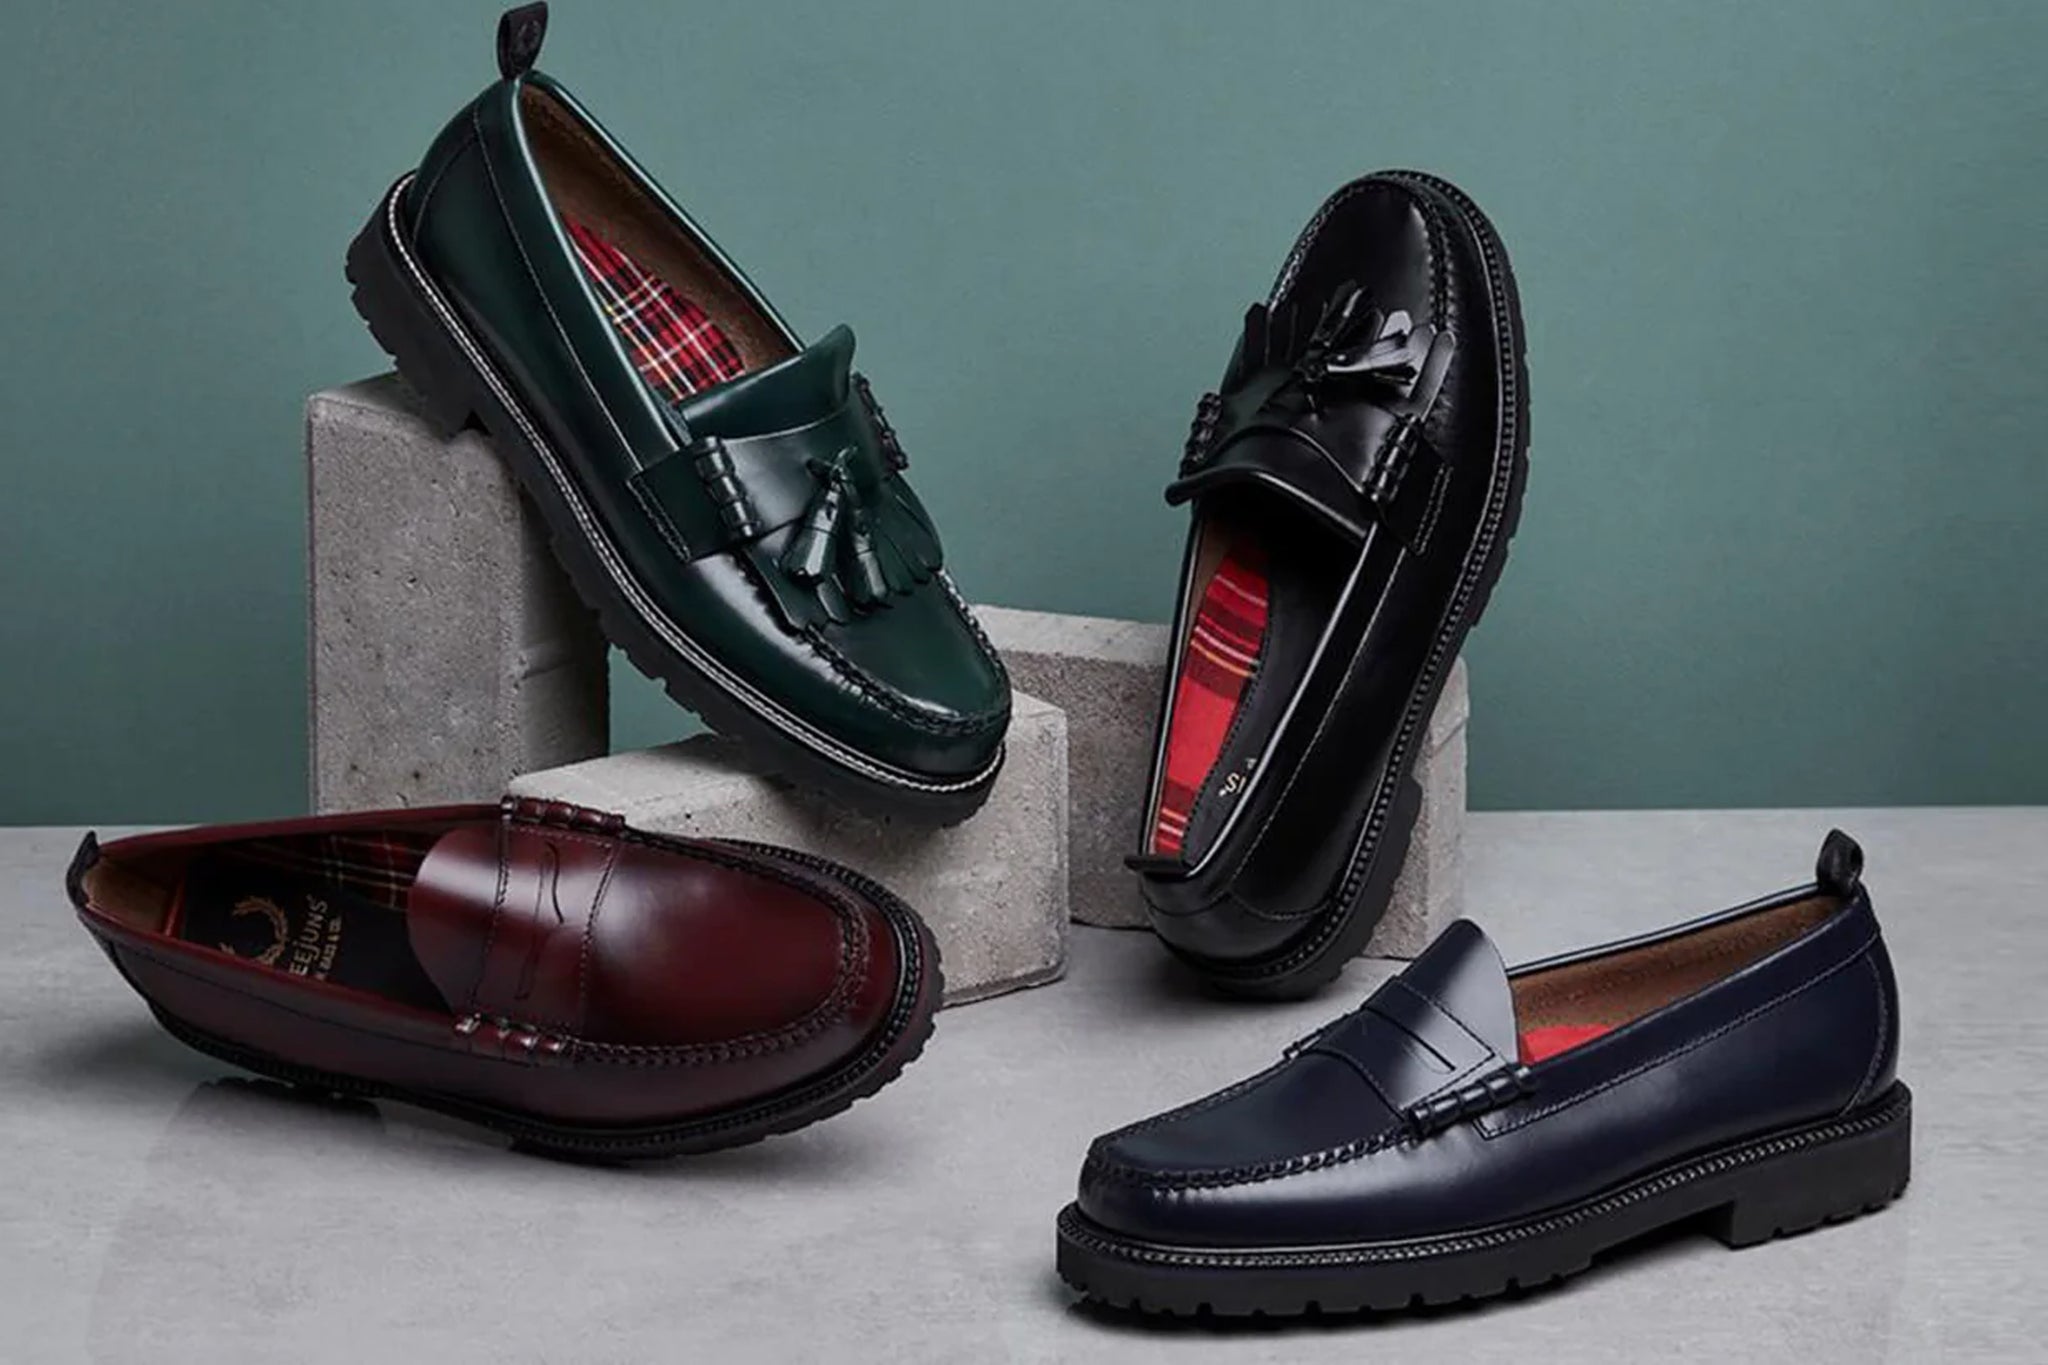 STYLING LOAFERS IN FALL & WINTER